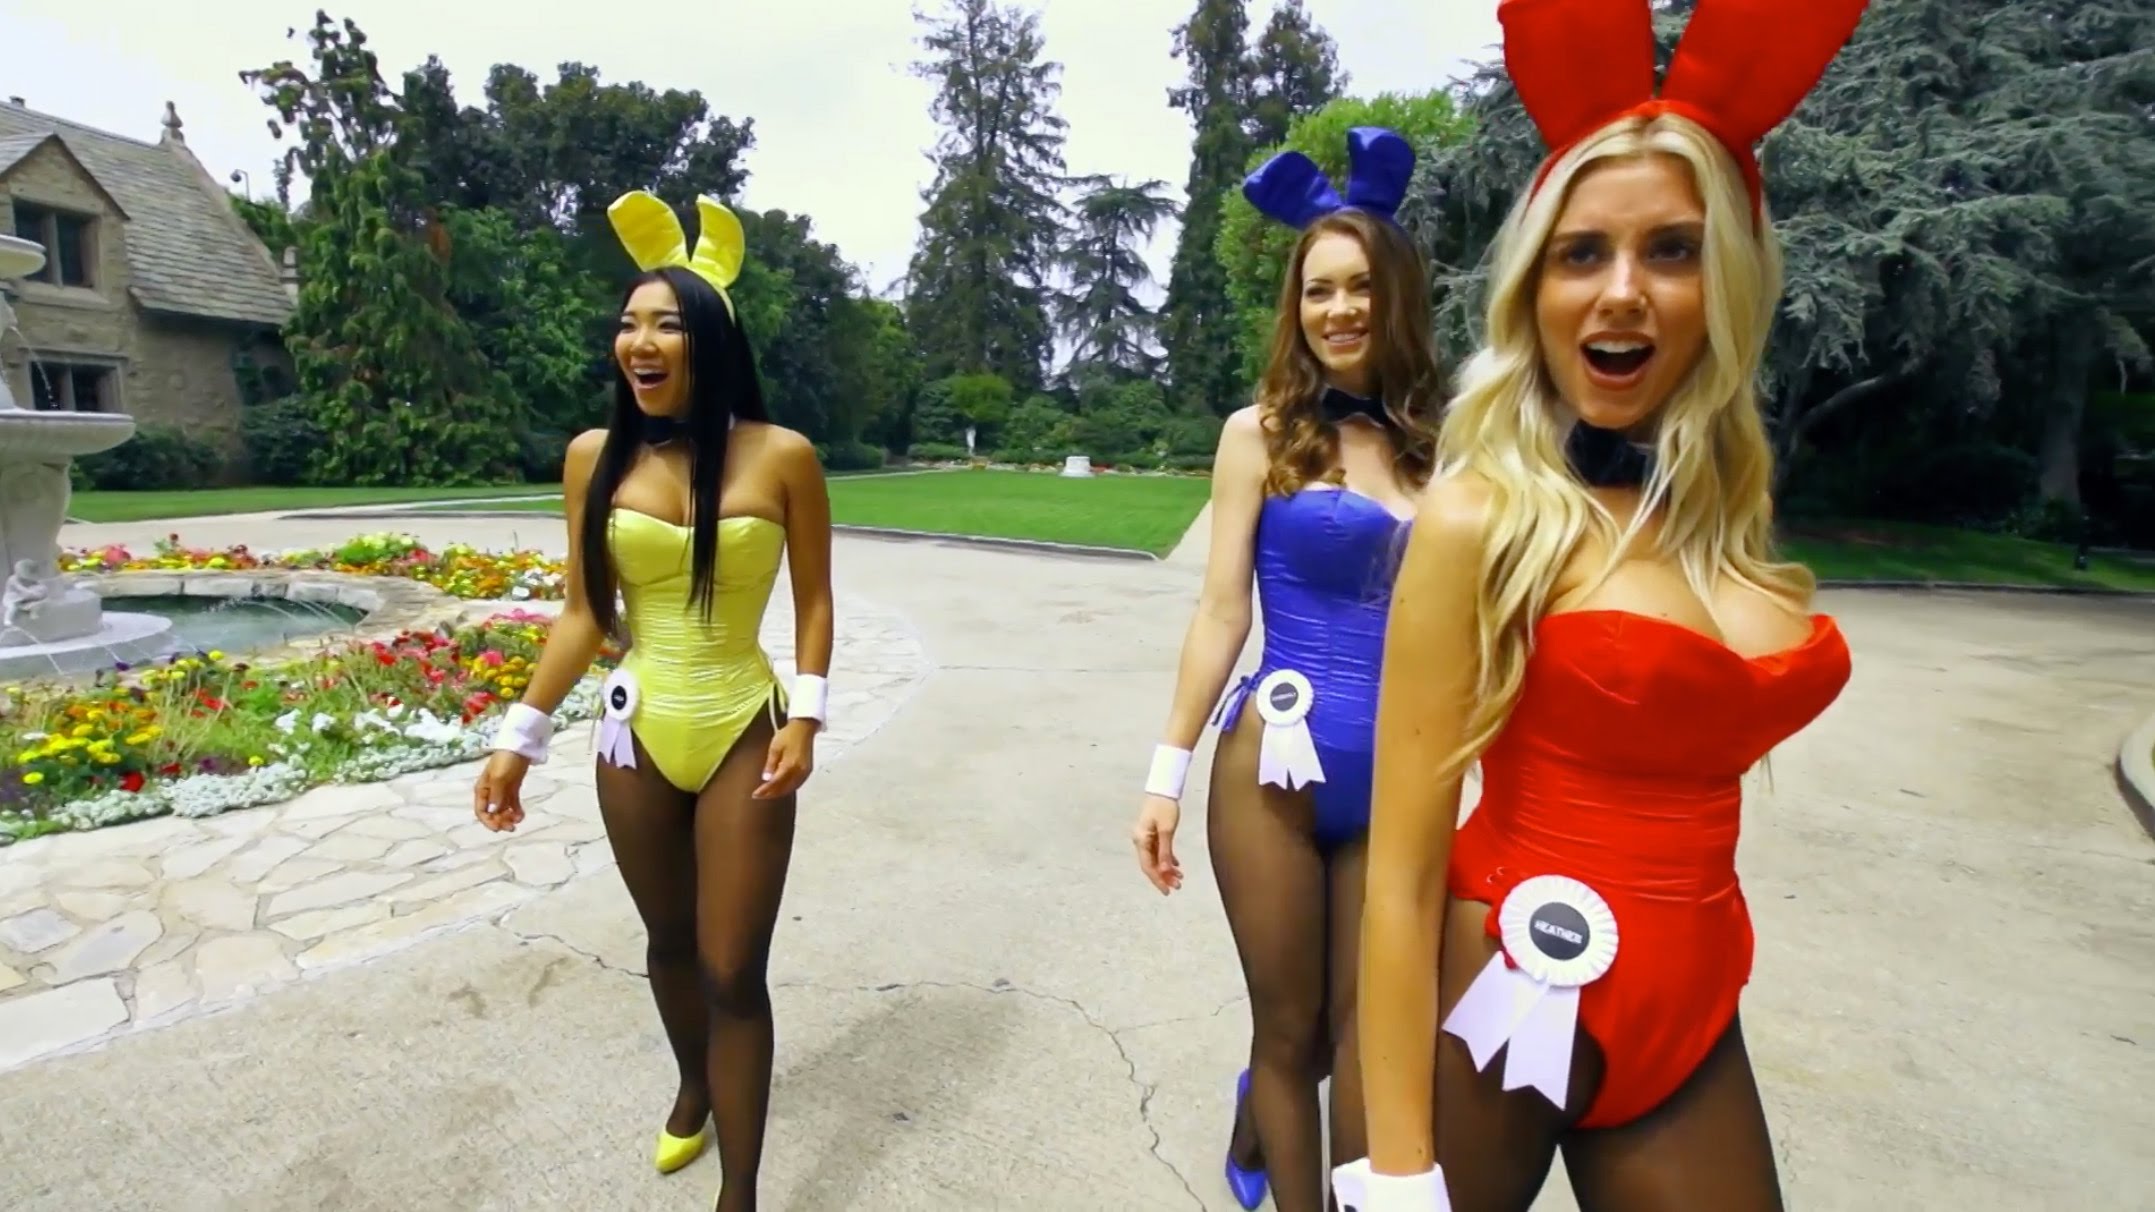 The Playboy Mansion was a place every model wanted to go...